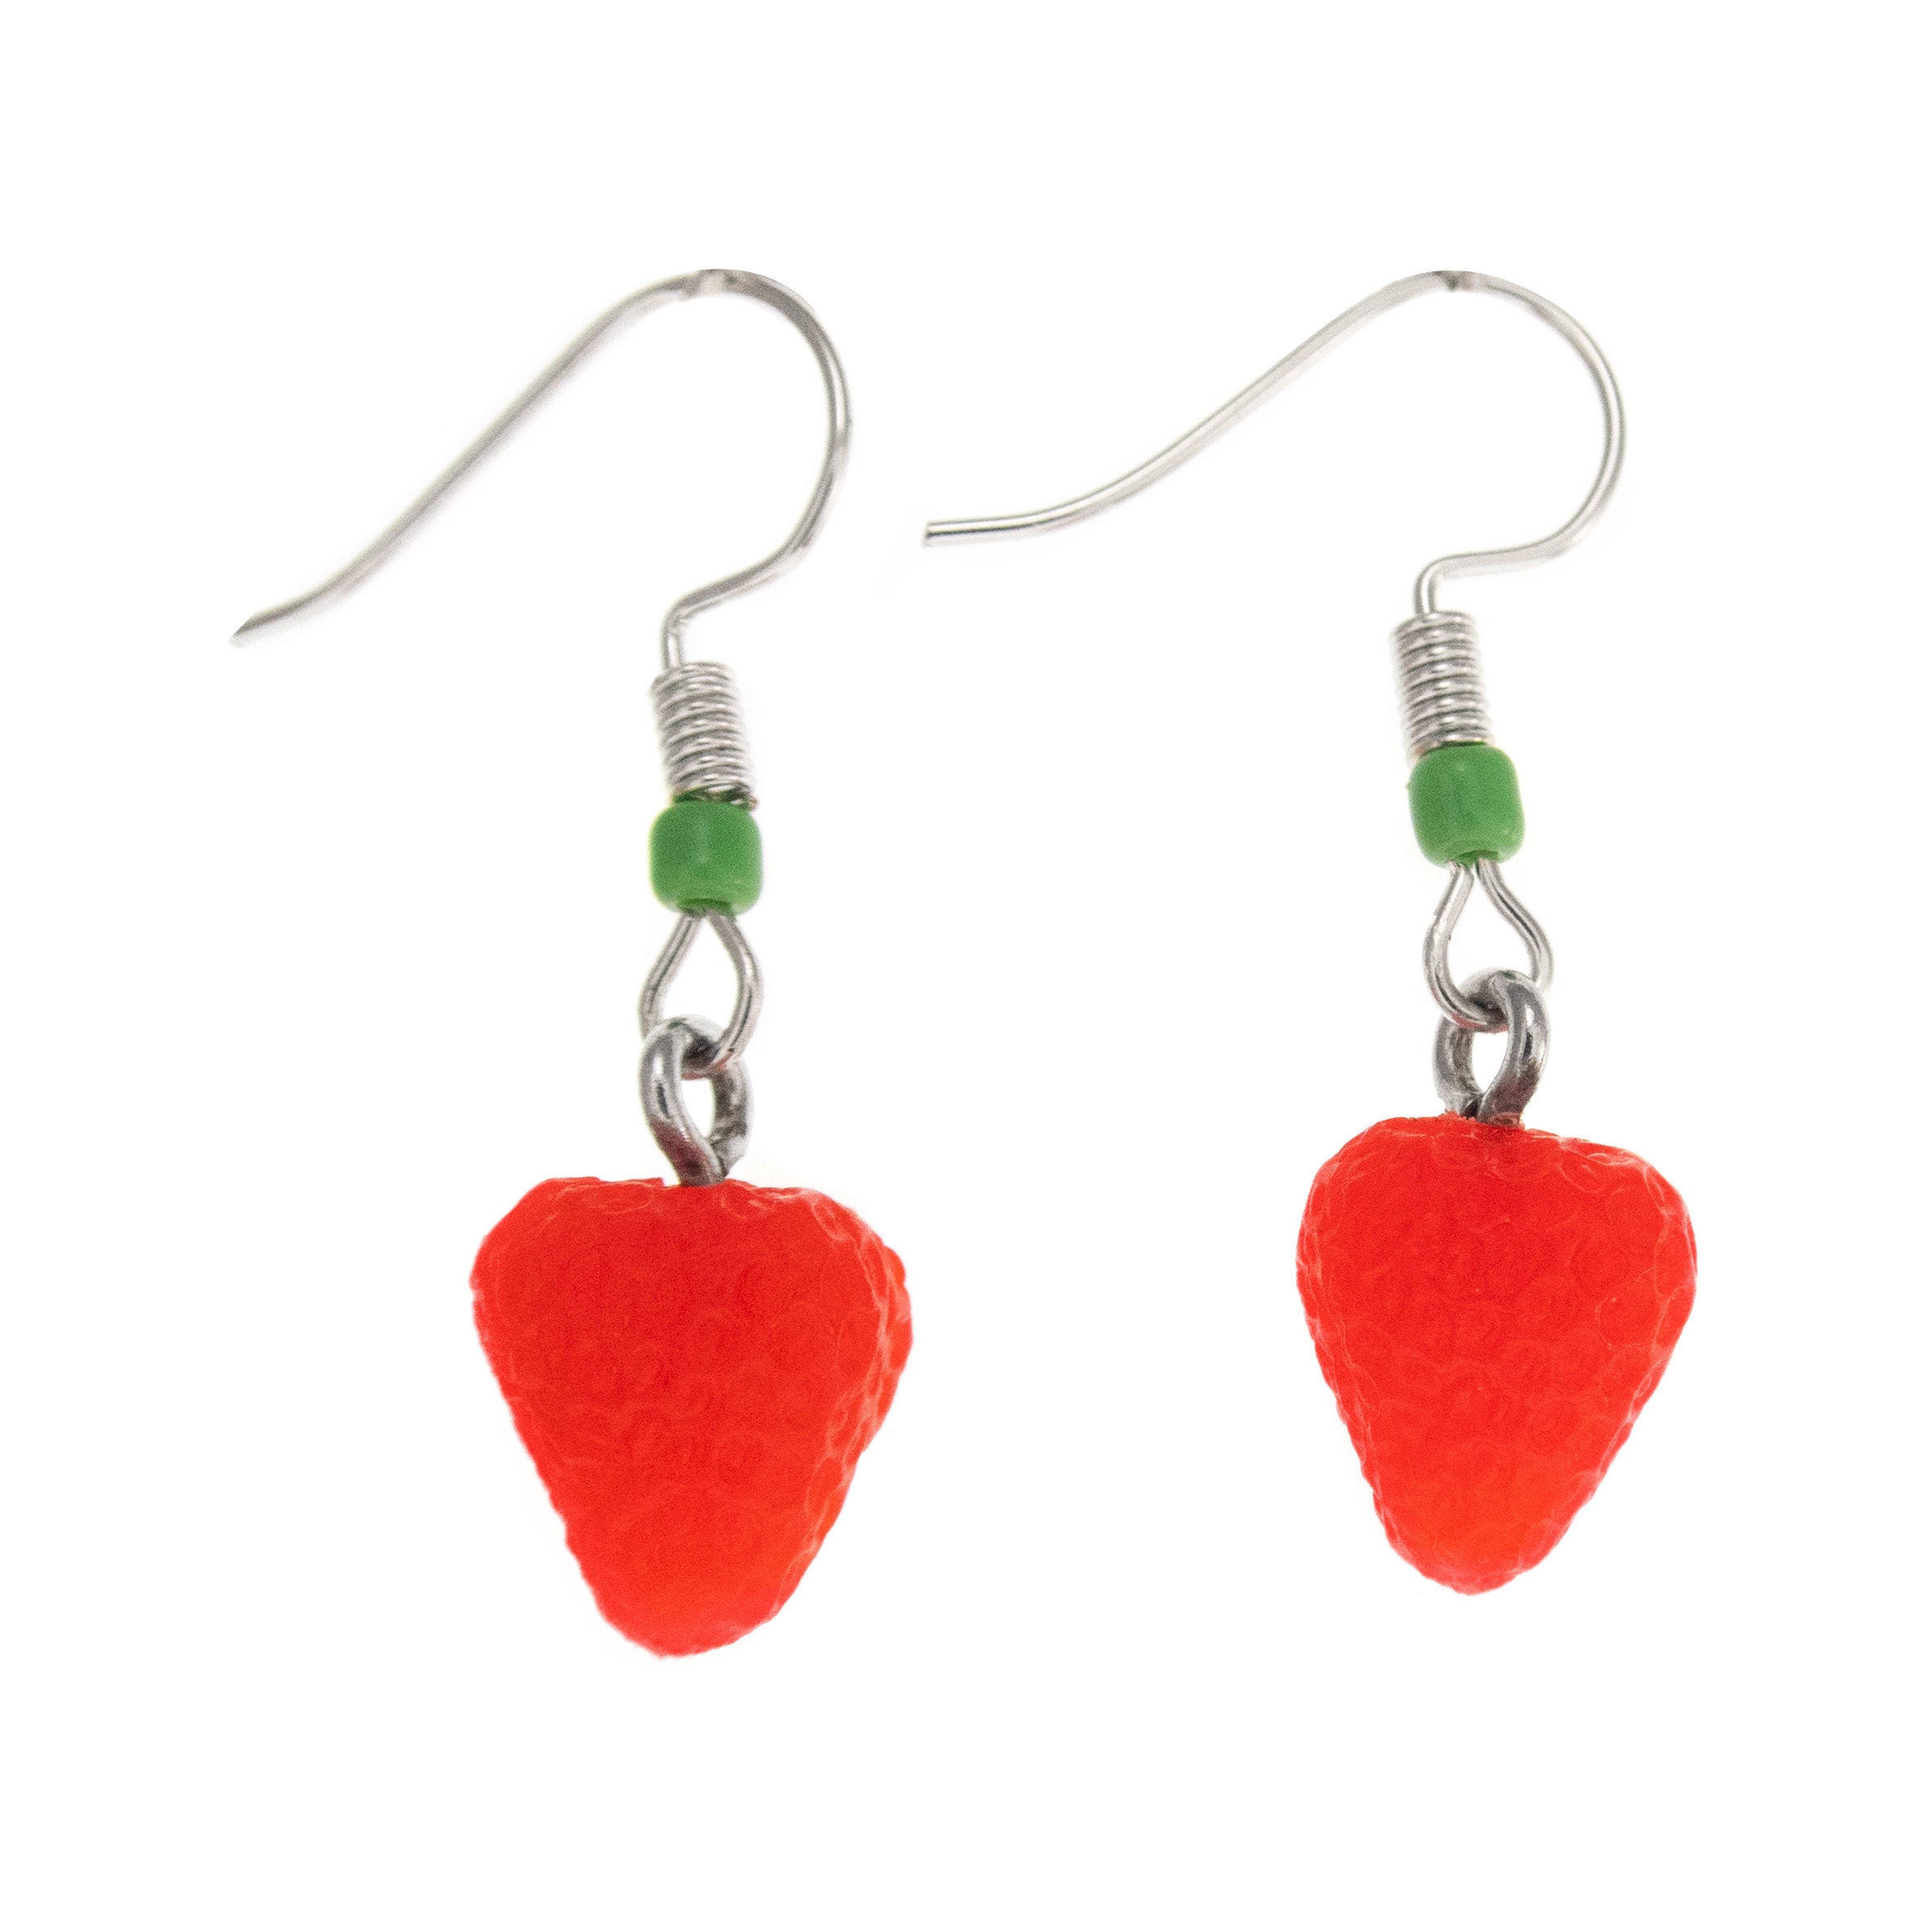 strawberry earrings and necklace